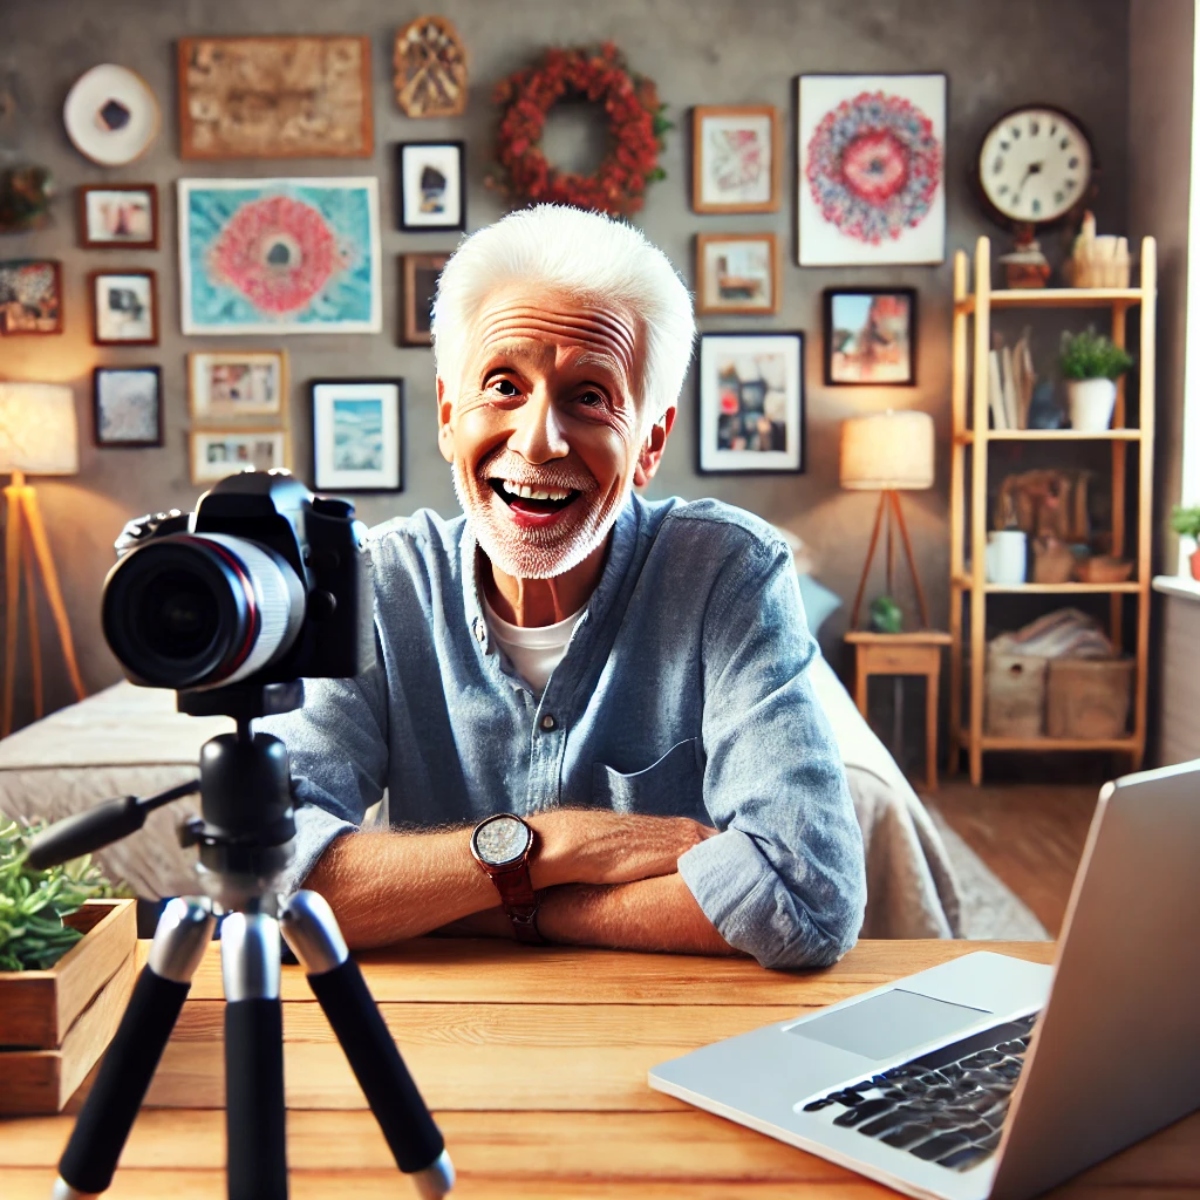 An image of a person creating a vlog for an article about "increase your retirement income"